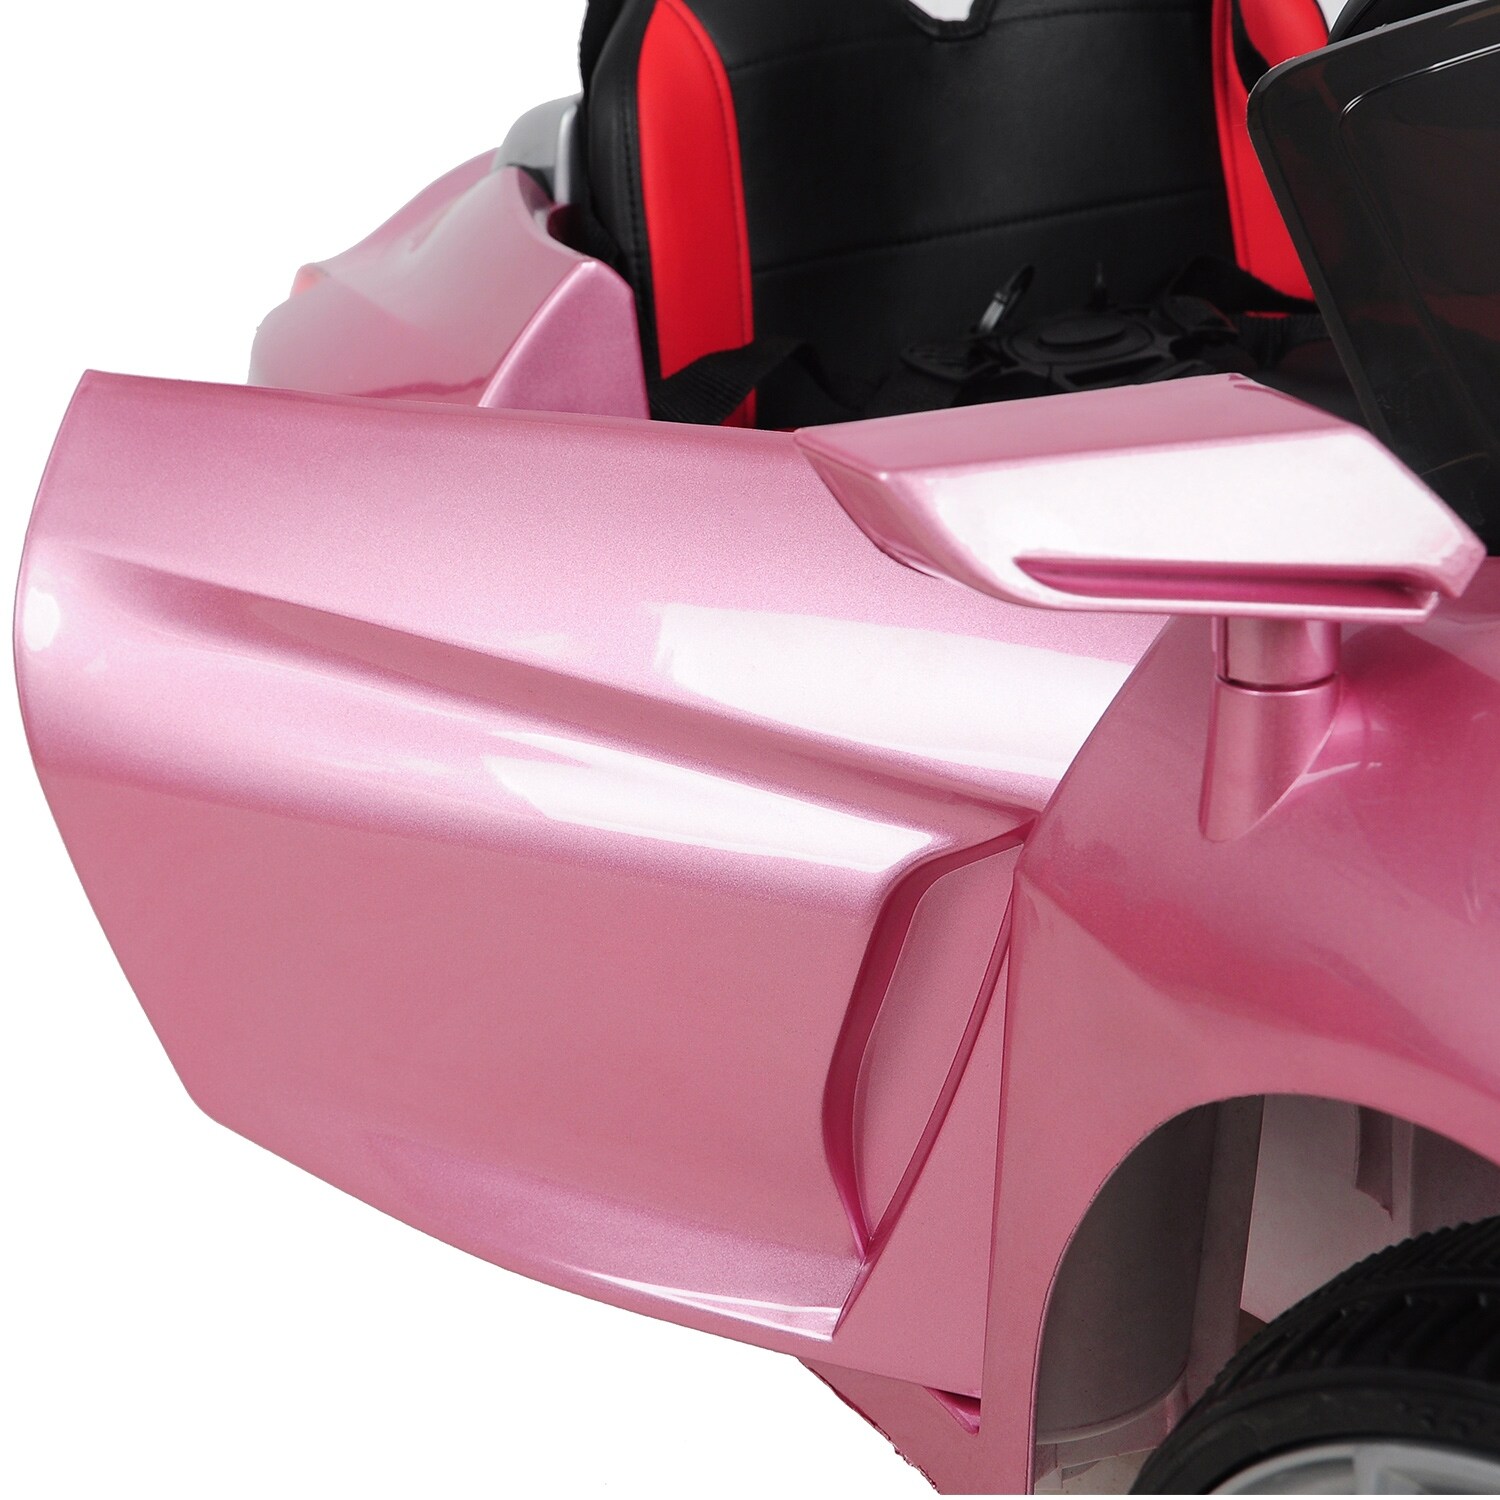 pink electric car with remote control